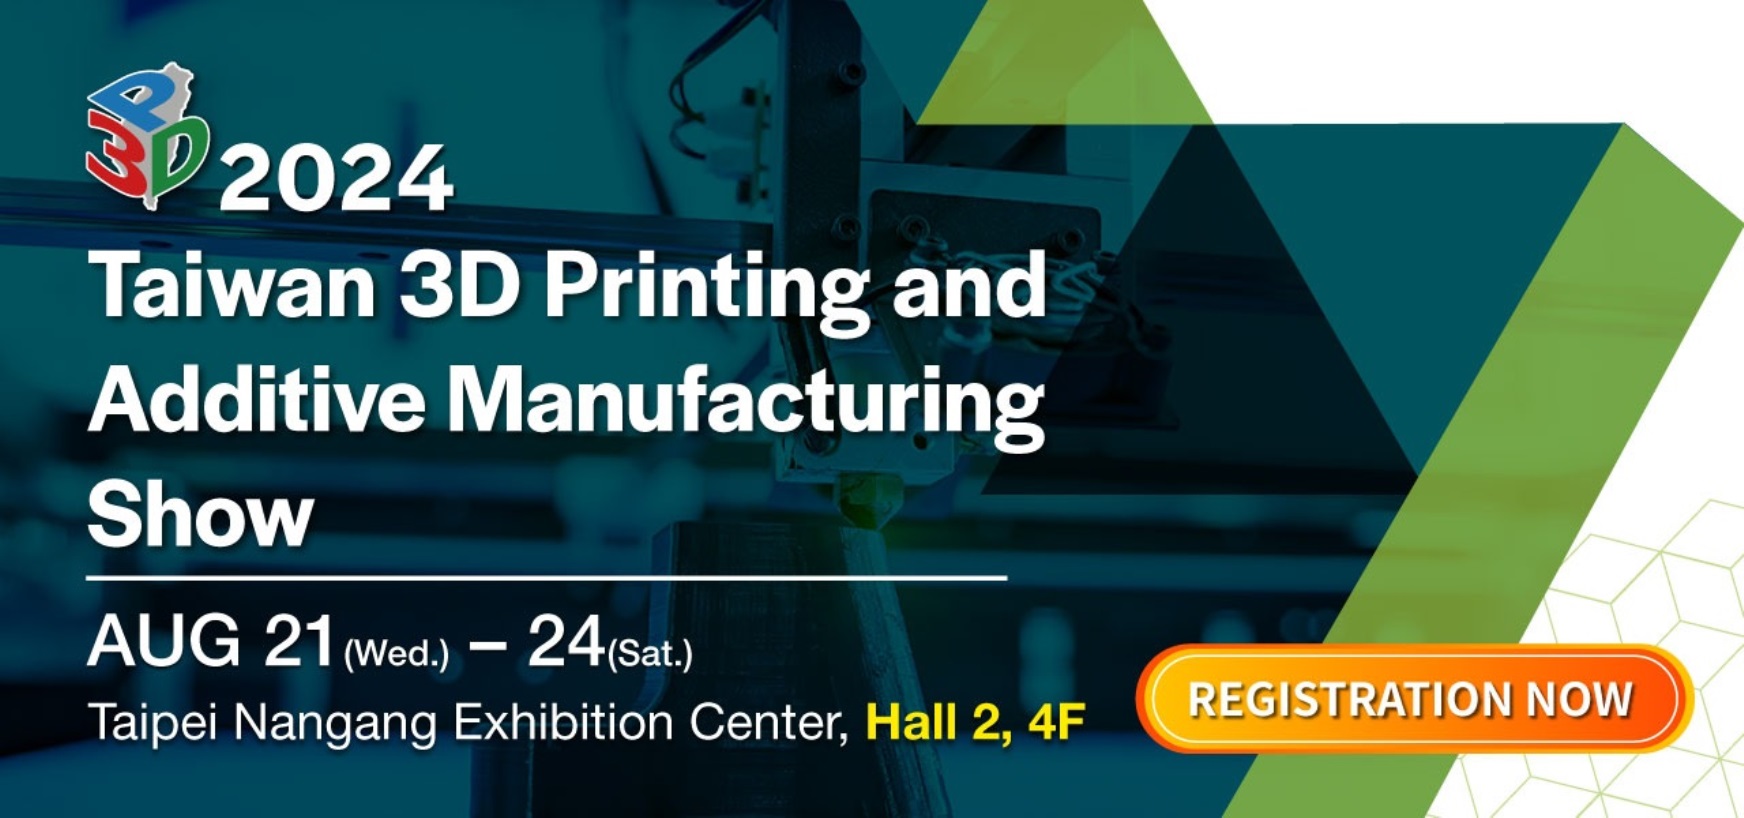 2024 Taiwan 3D Printing and Additive Manufacturing Show